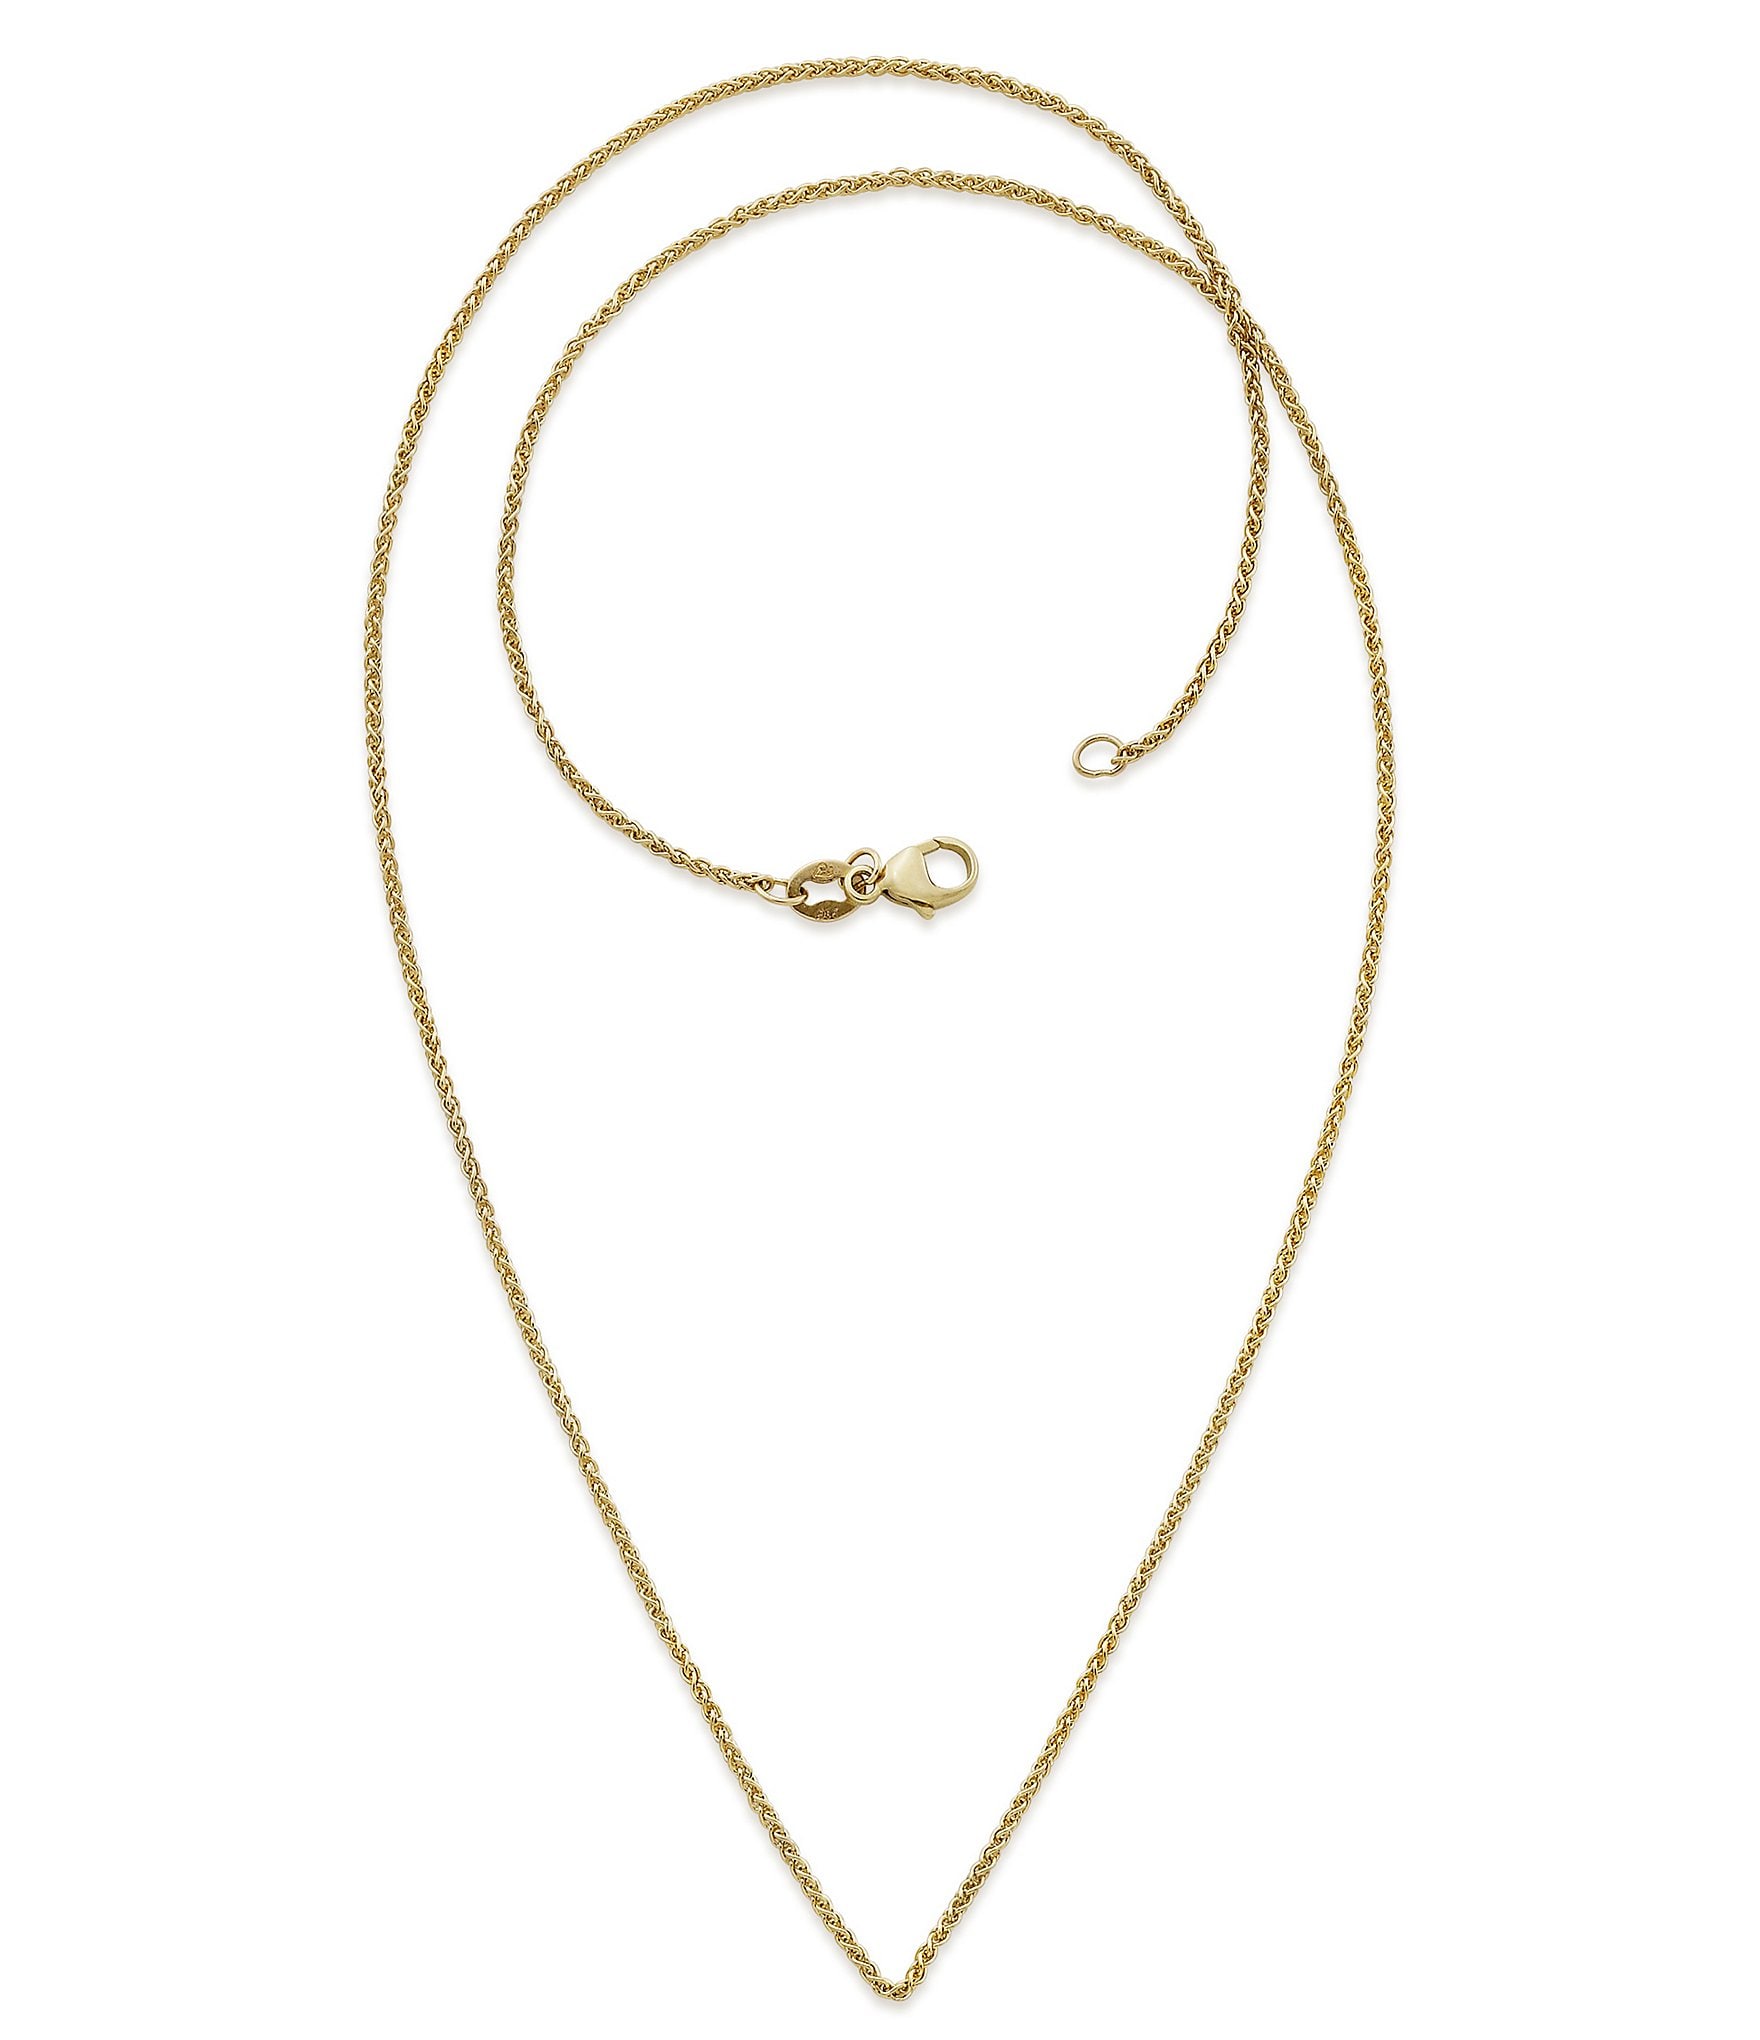 James Avery Forged Beaded Chain Necklace - 16 in.